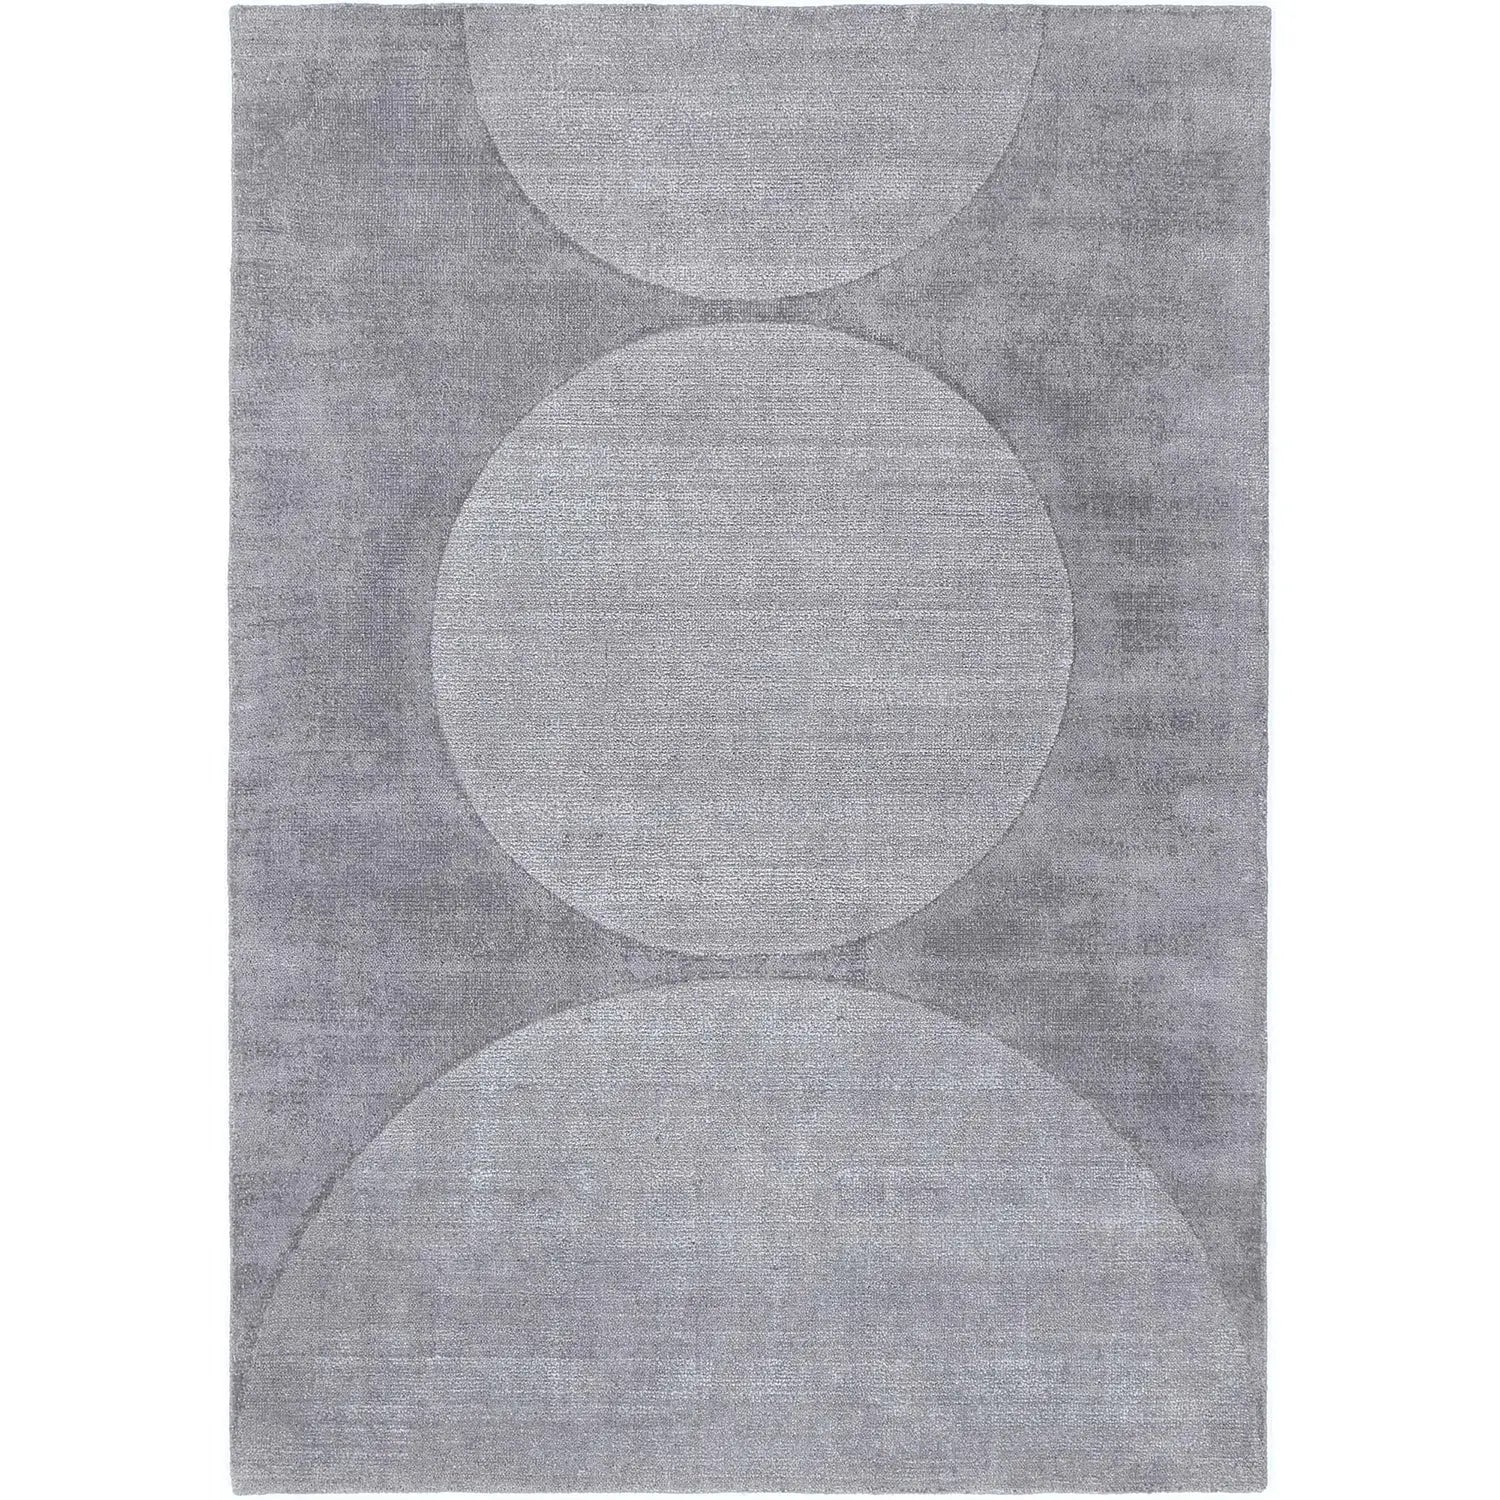 Athena Silver Art Deco Rug - Rugs - Rugs a Million